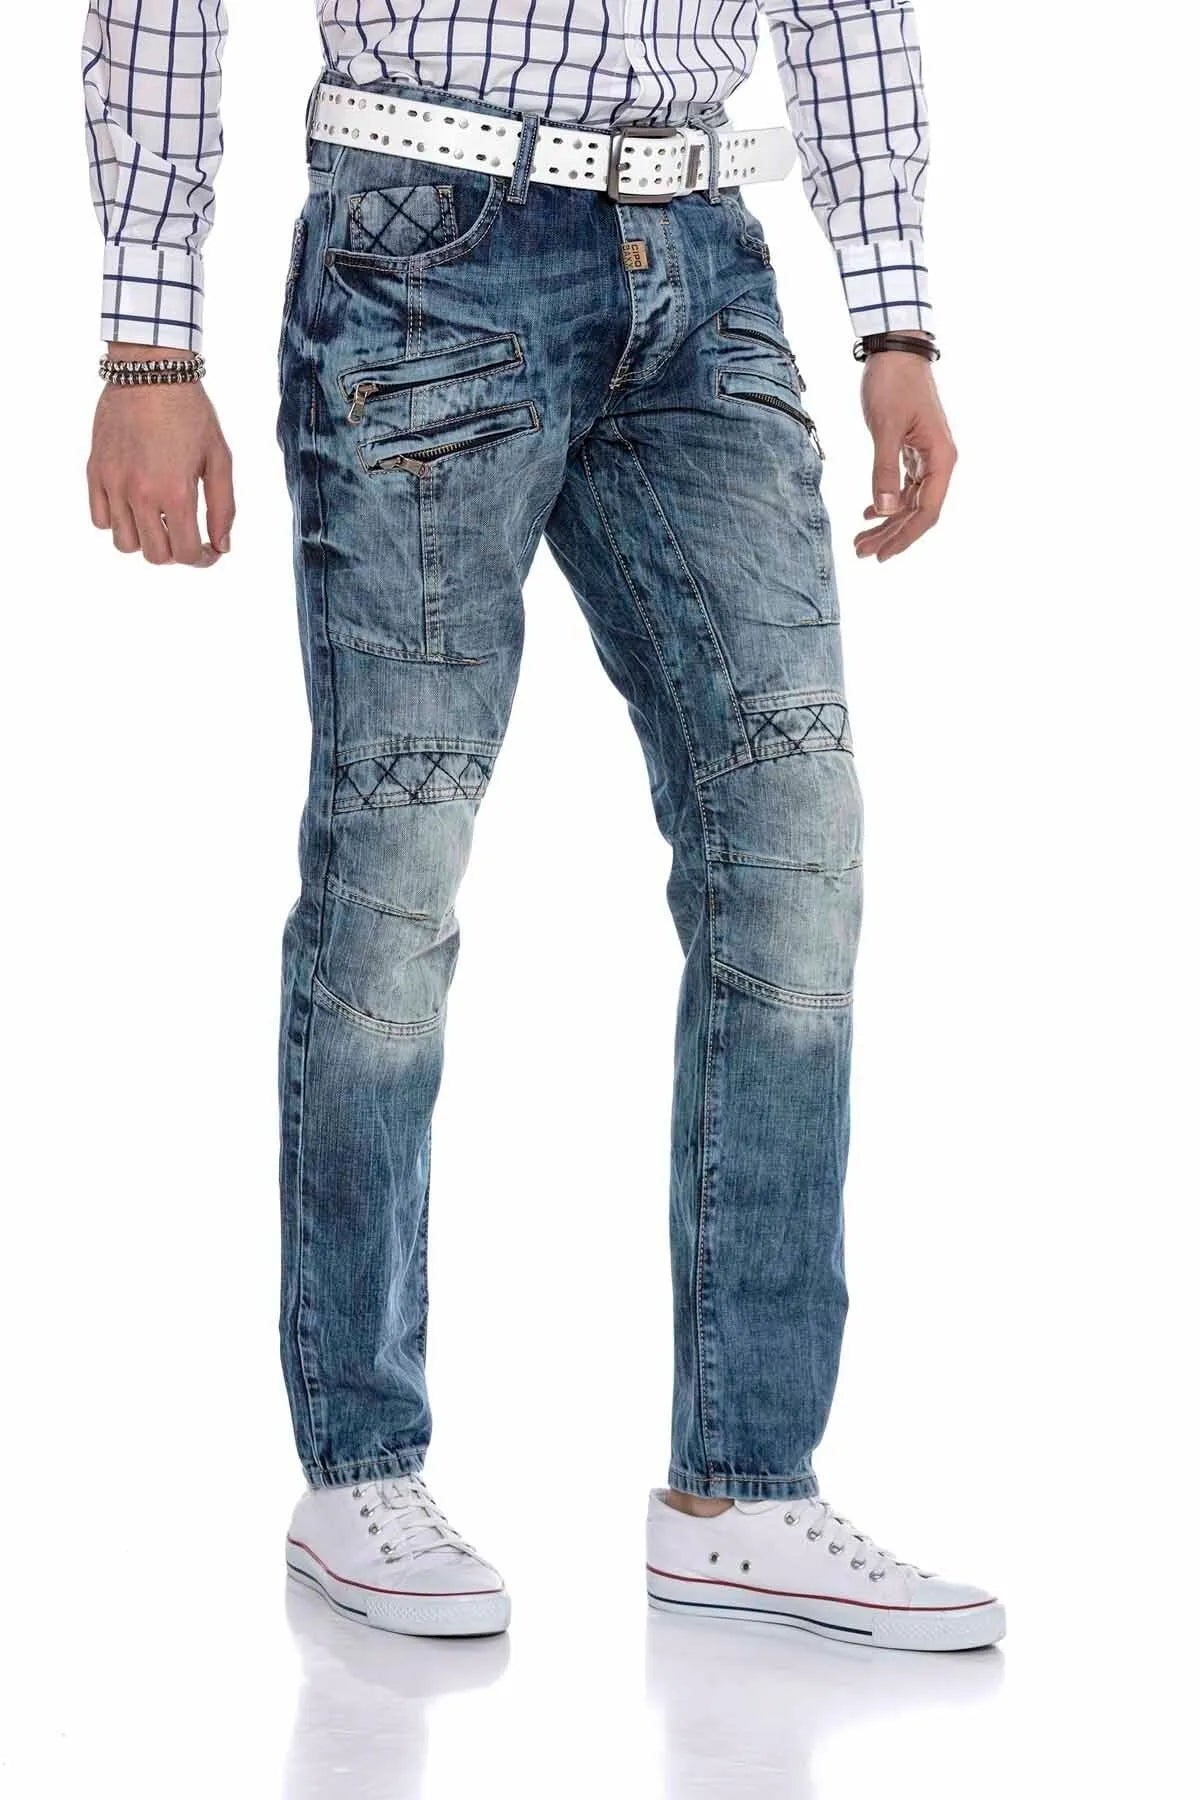 CD510 men's comfortable jeans with striking stitching